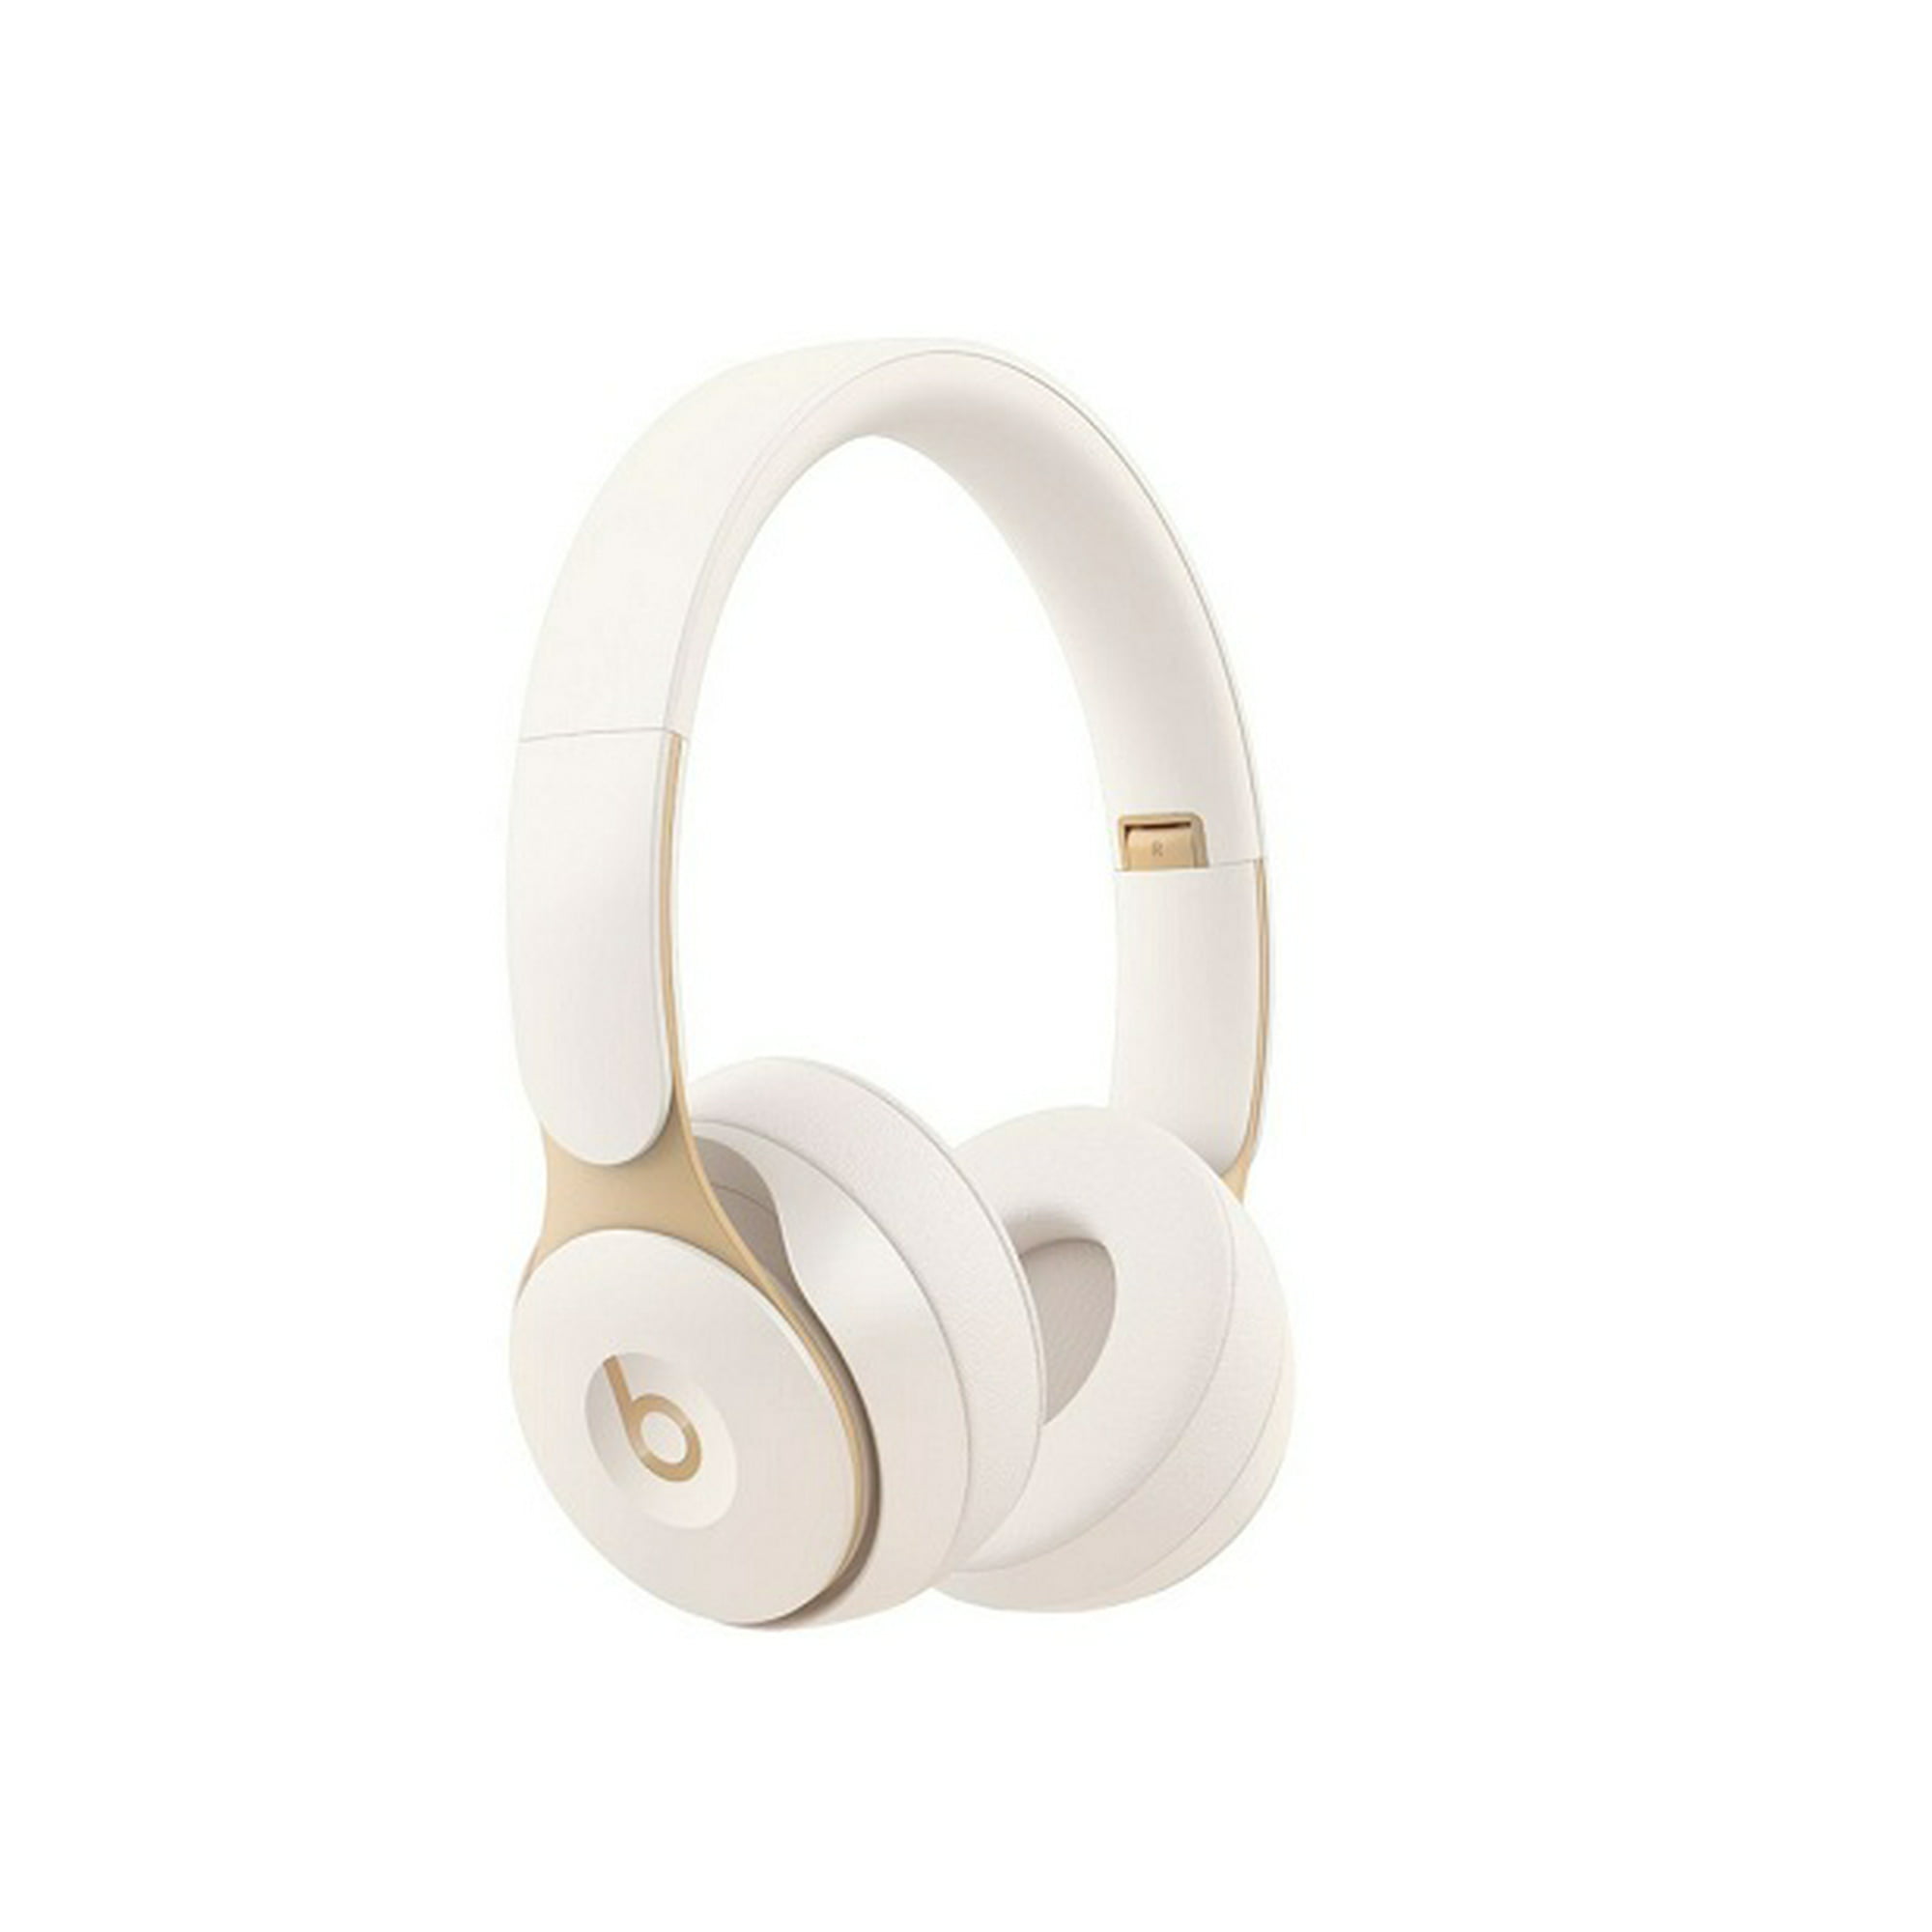 Refurbished Beats By Dr. Dre Solo Pro Ivory Noise Cancelling